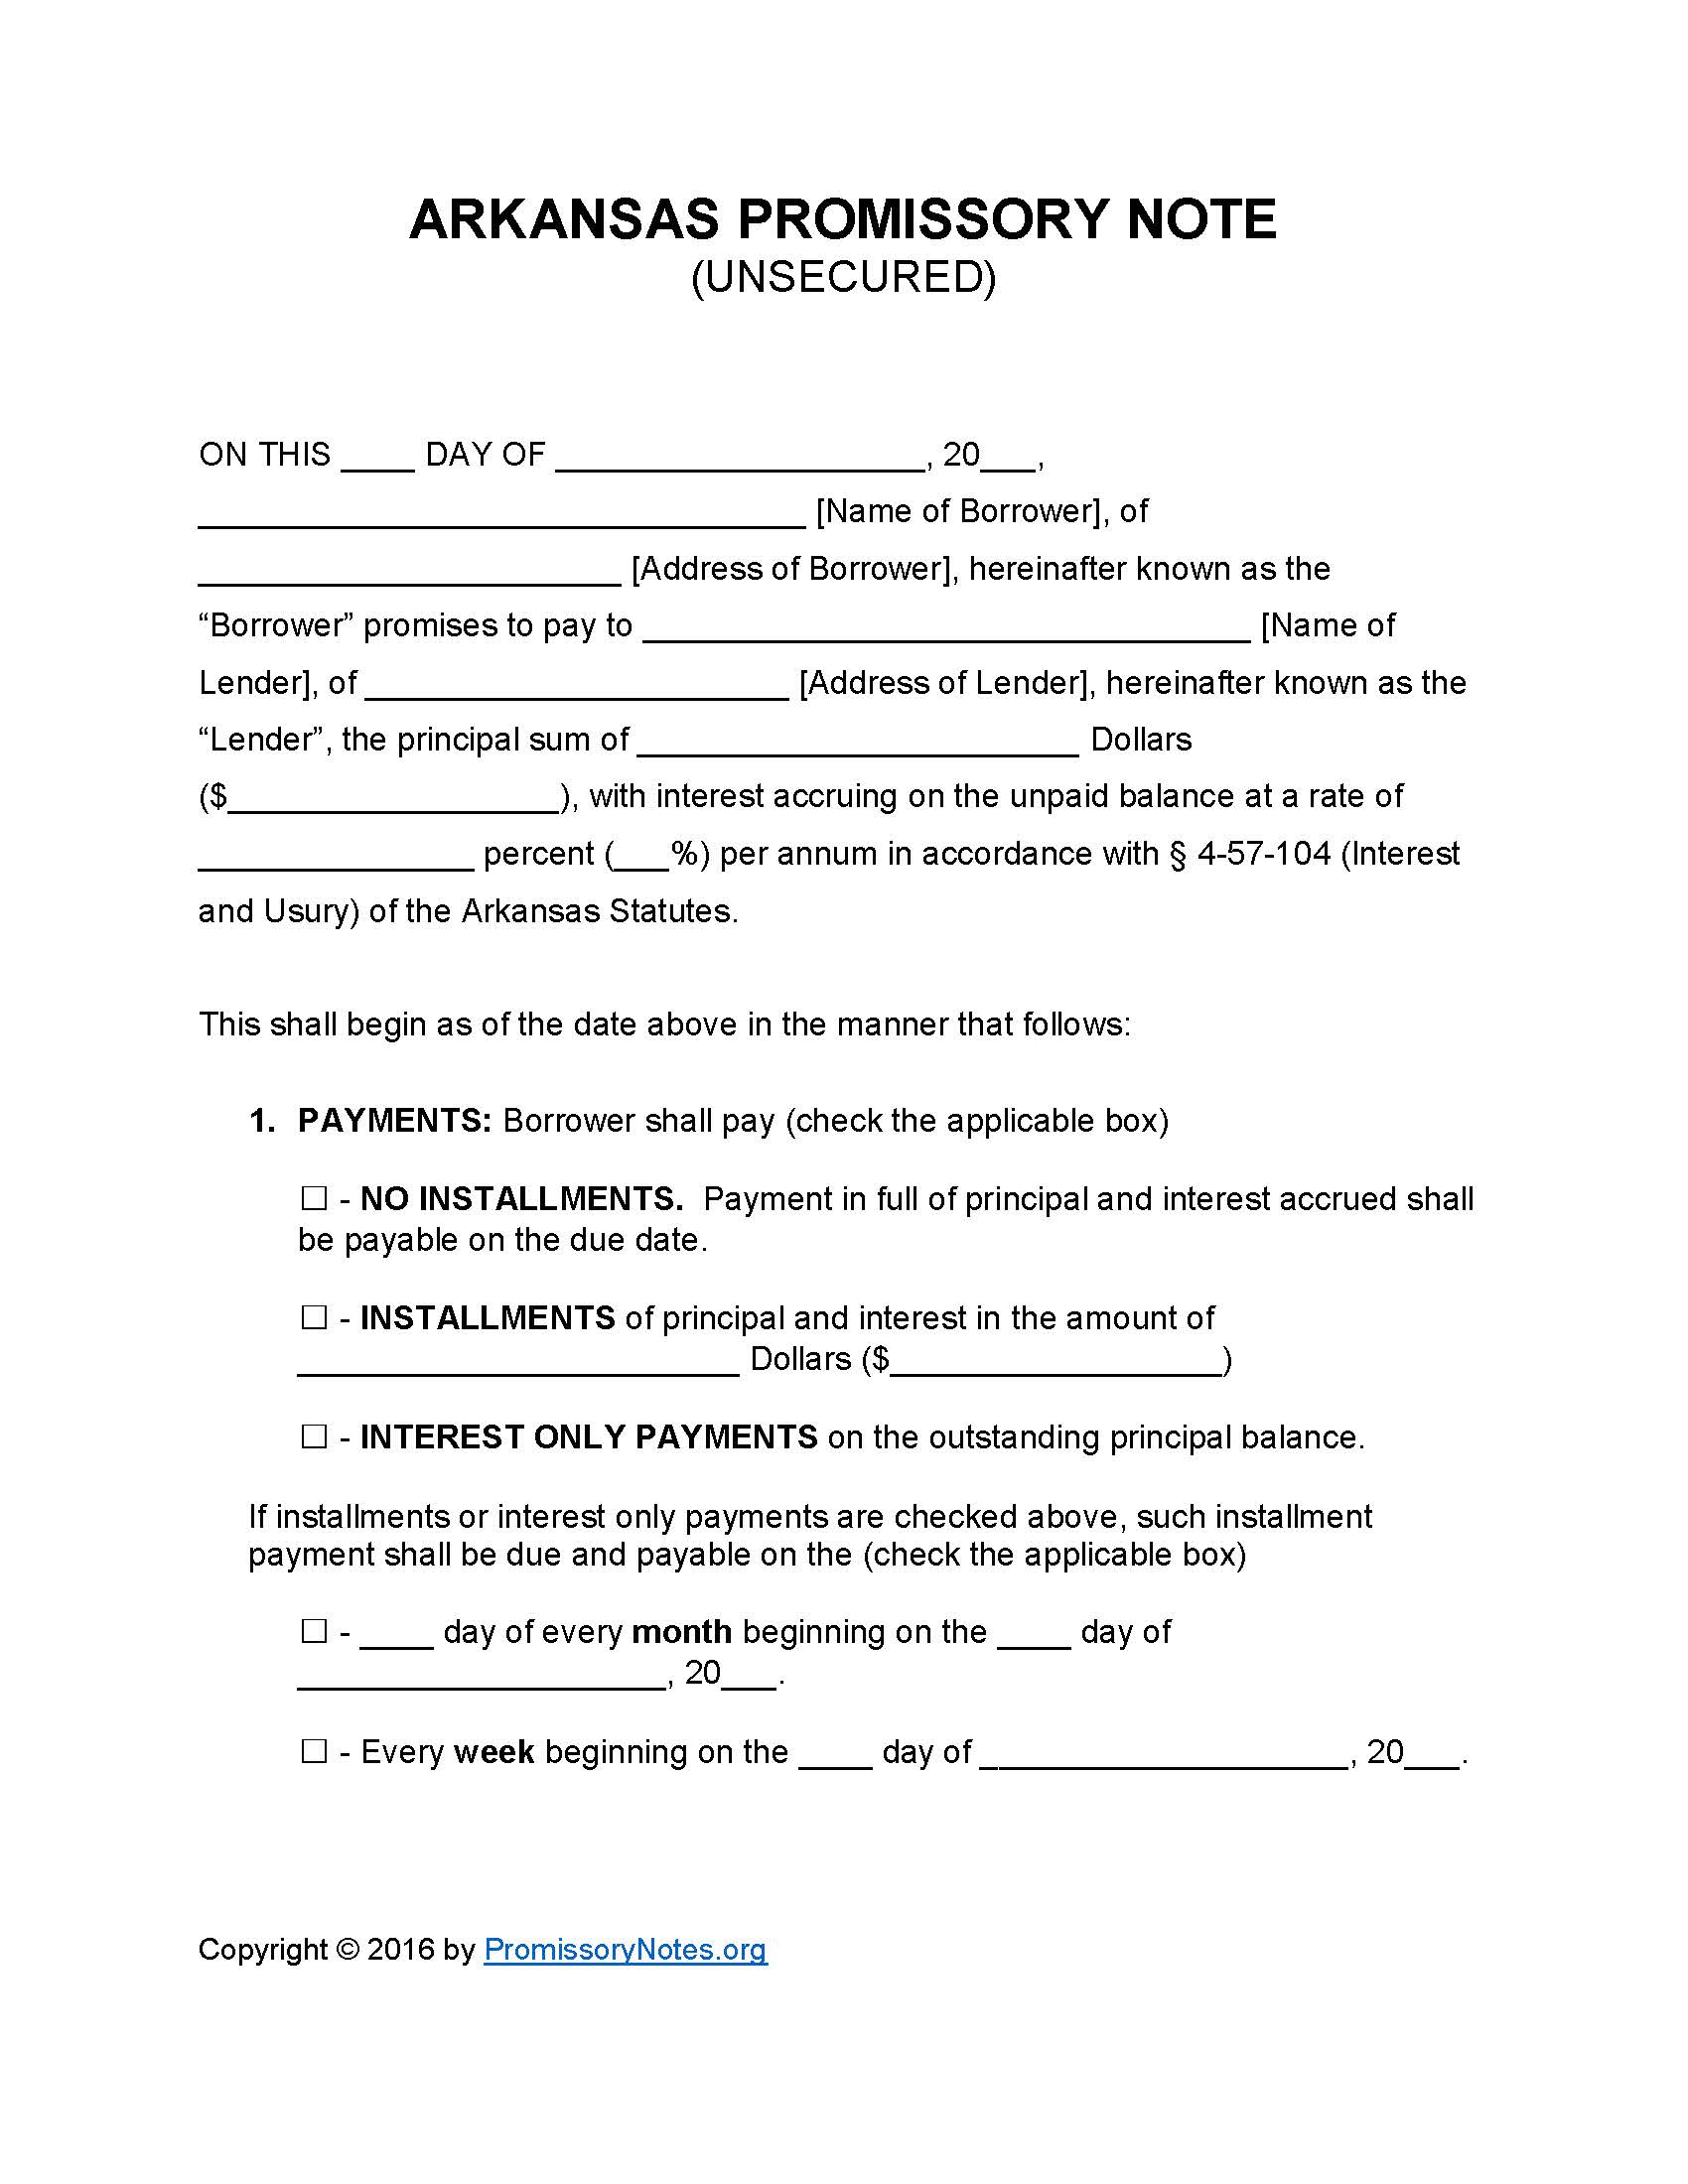 arkansas-unsecured-promissory-note-form